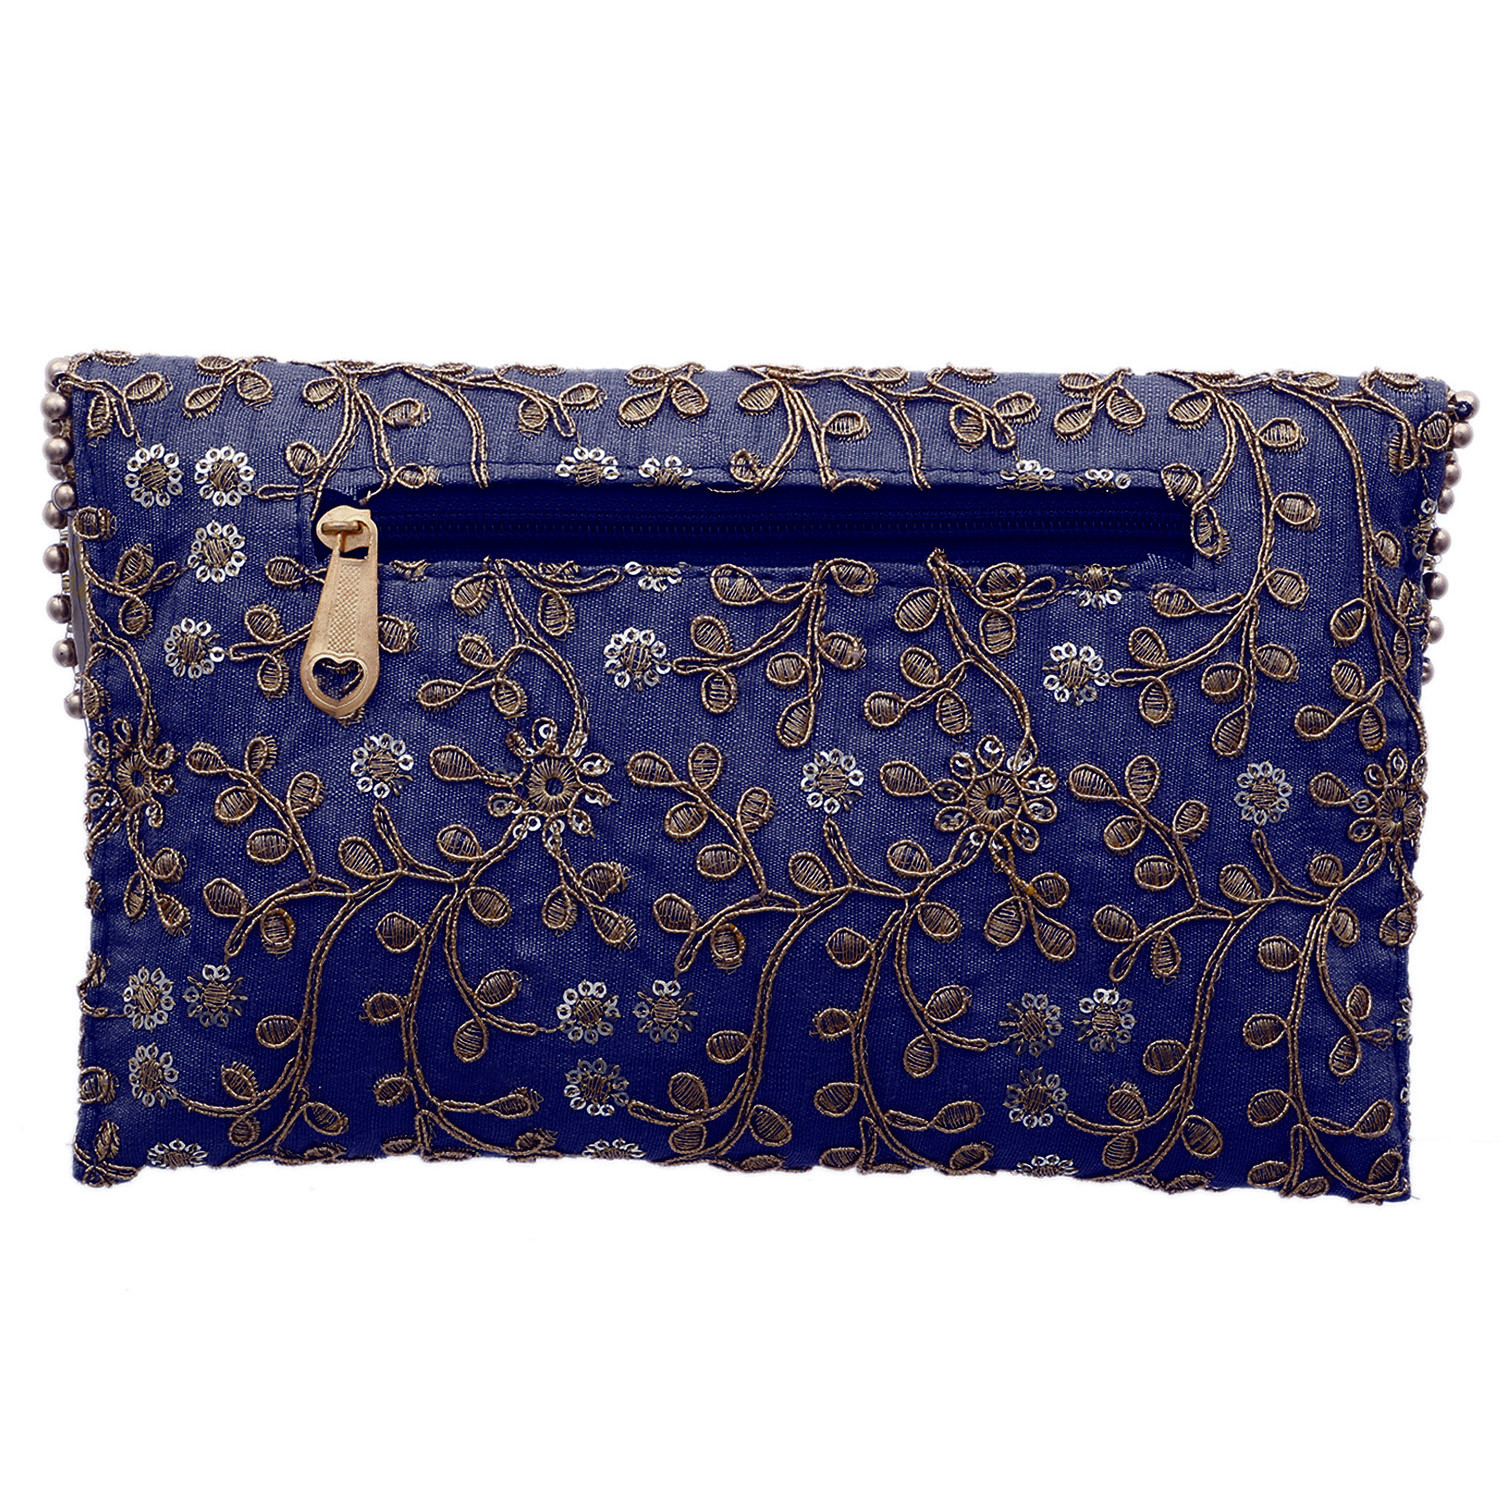 Kuber Industries Embroidery Golden Pearl Border Clutch|Hand Purse & Pearls Handle With Magnetic Lock For Woman,Girls (Blue)